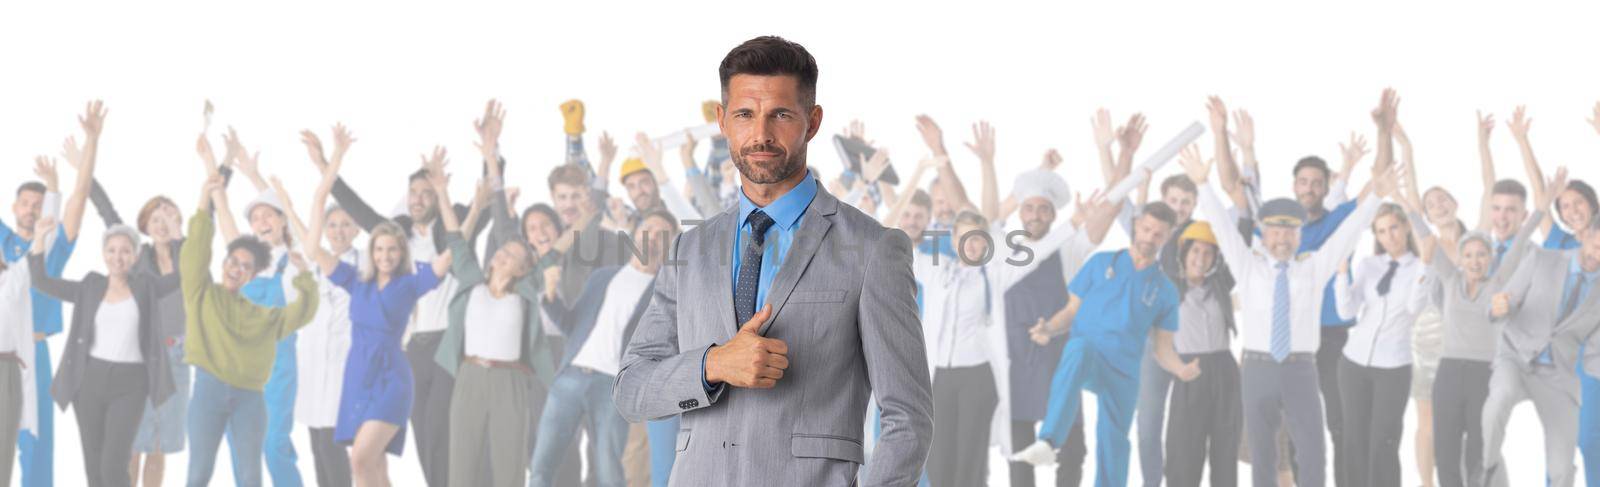 Business man with thumb up in front of many businesspeople cooperation job search staff management concept